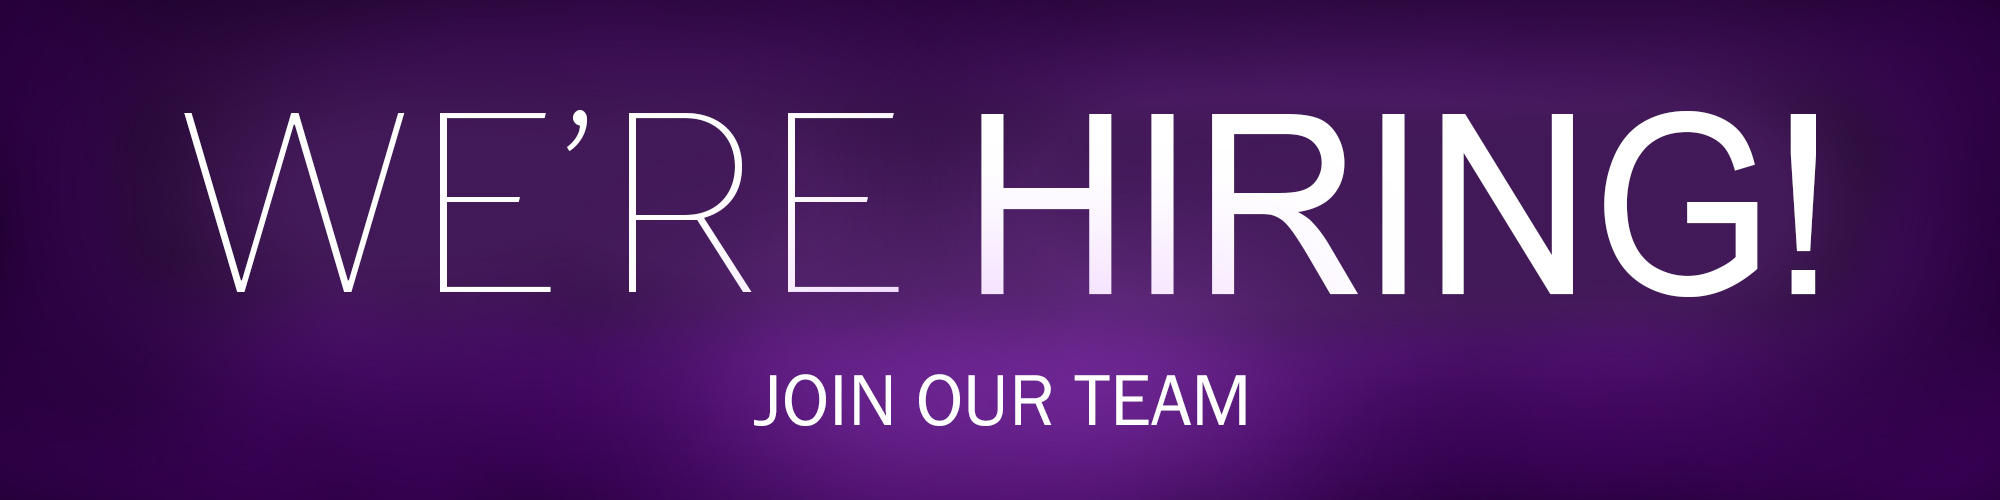 We're Hiring! Join Our Team